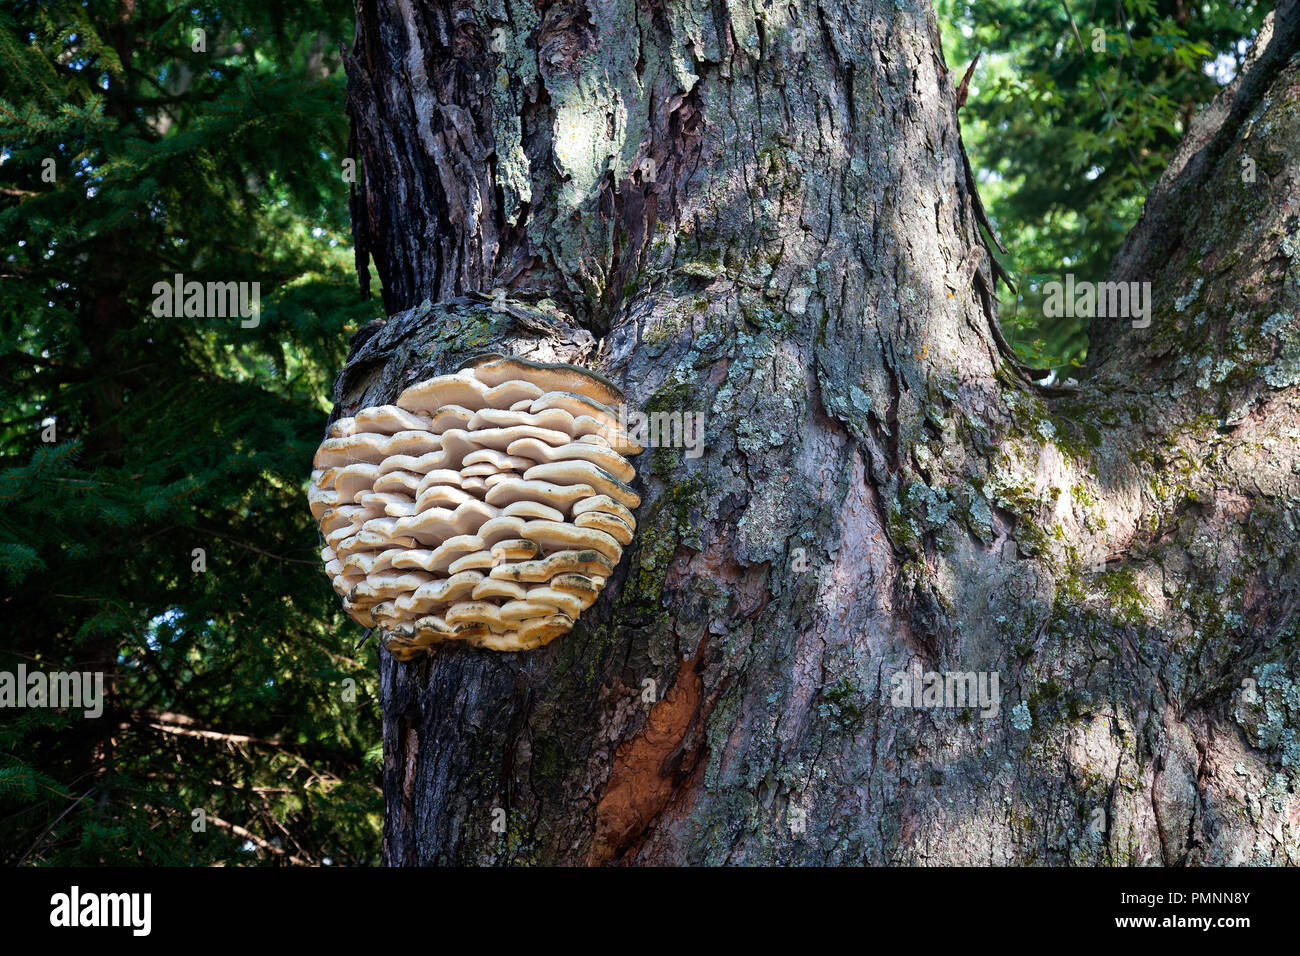 Mushroom cluster growing on a large tree trunk. Stock Photo